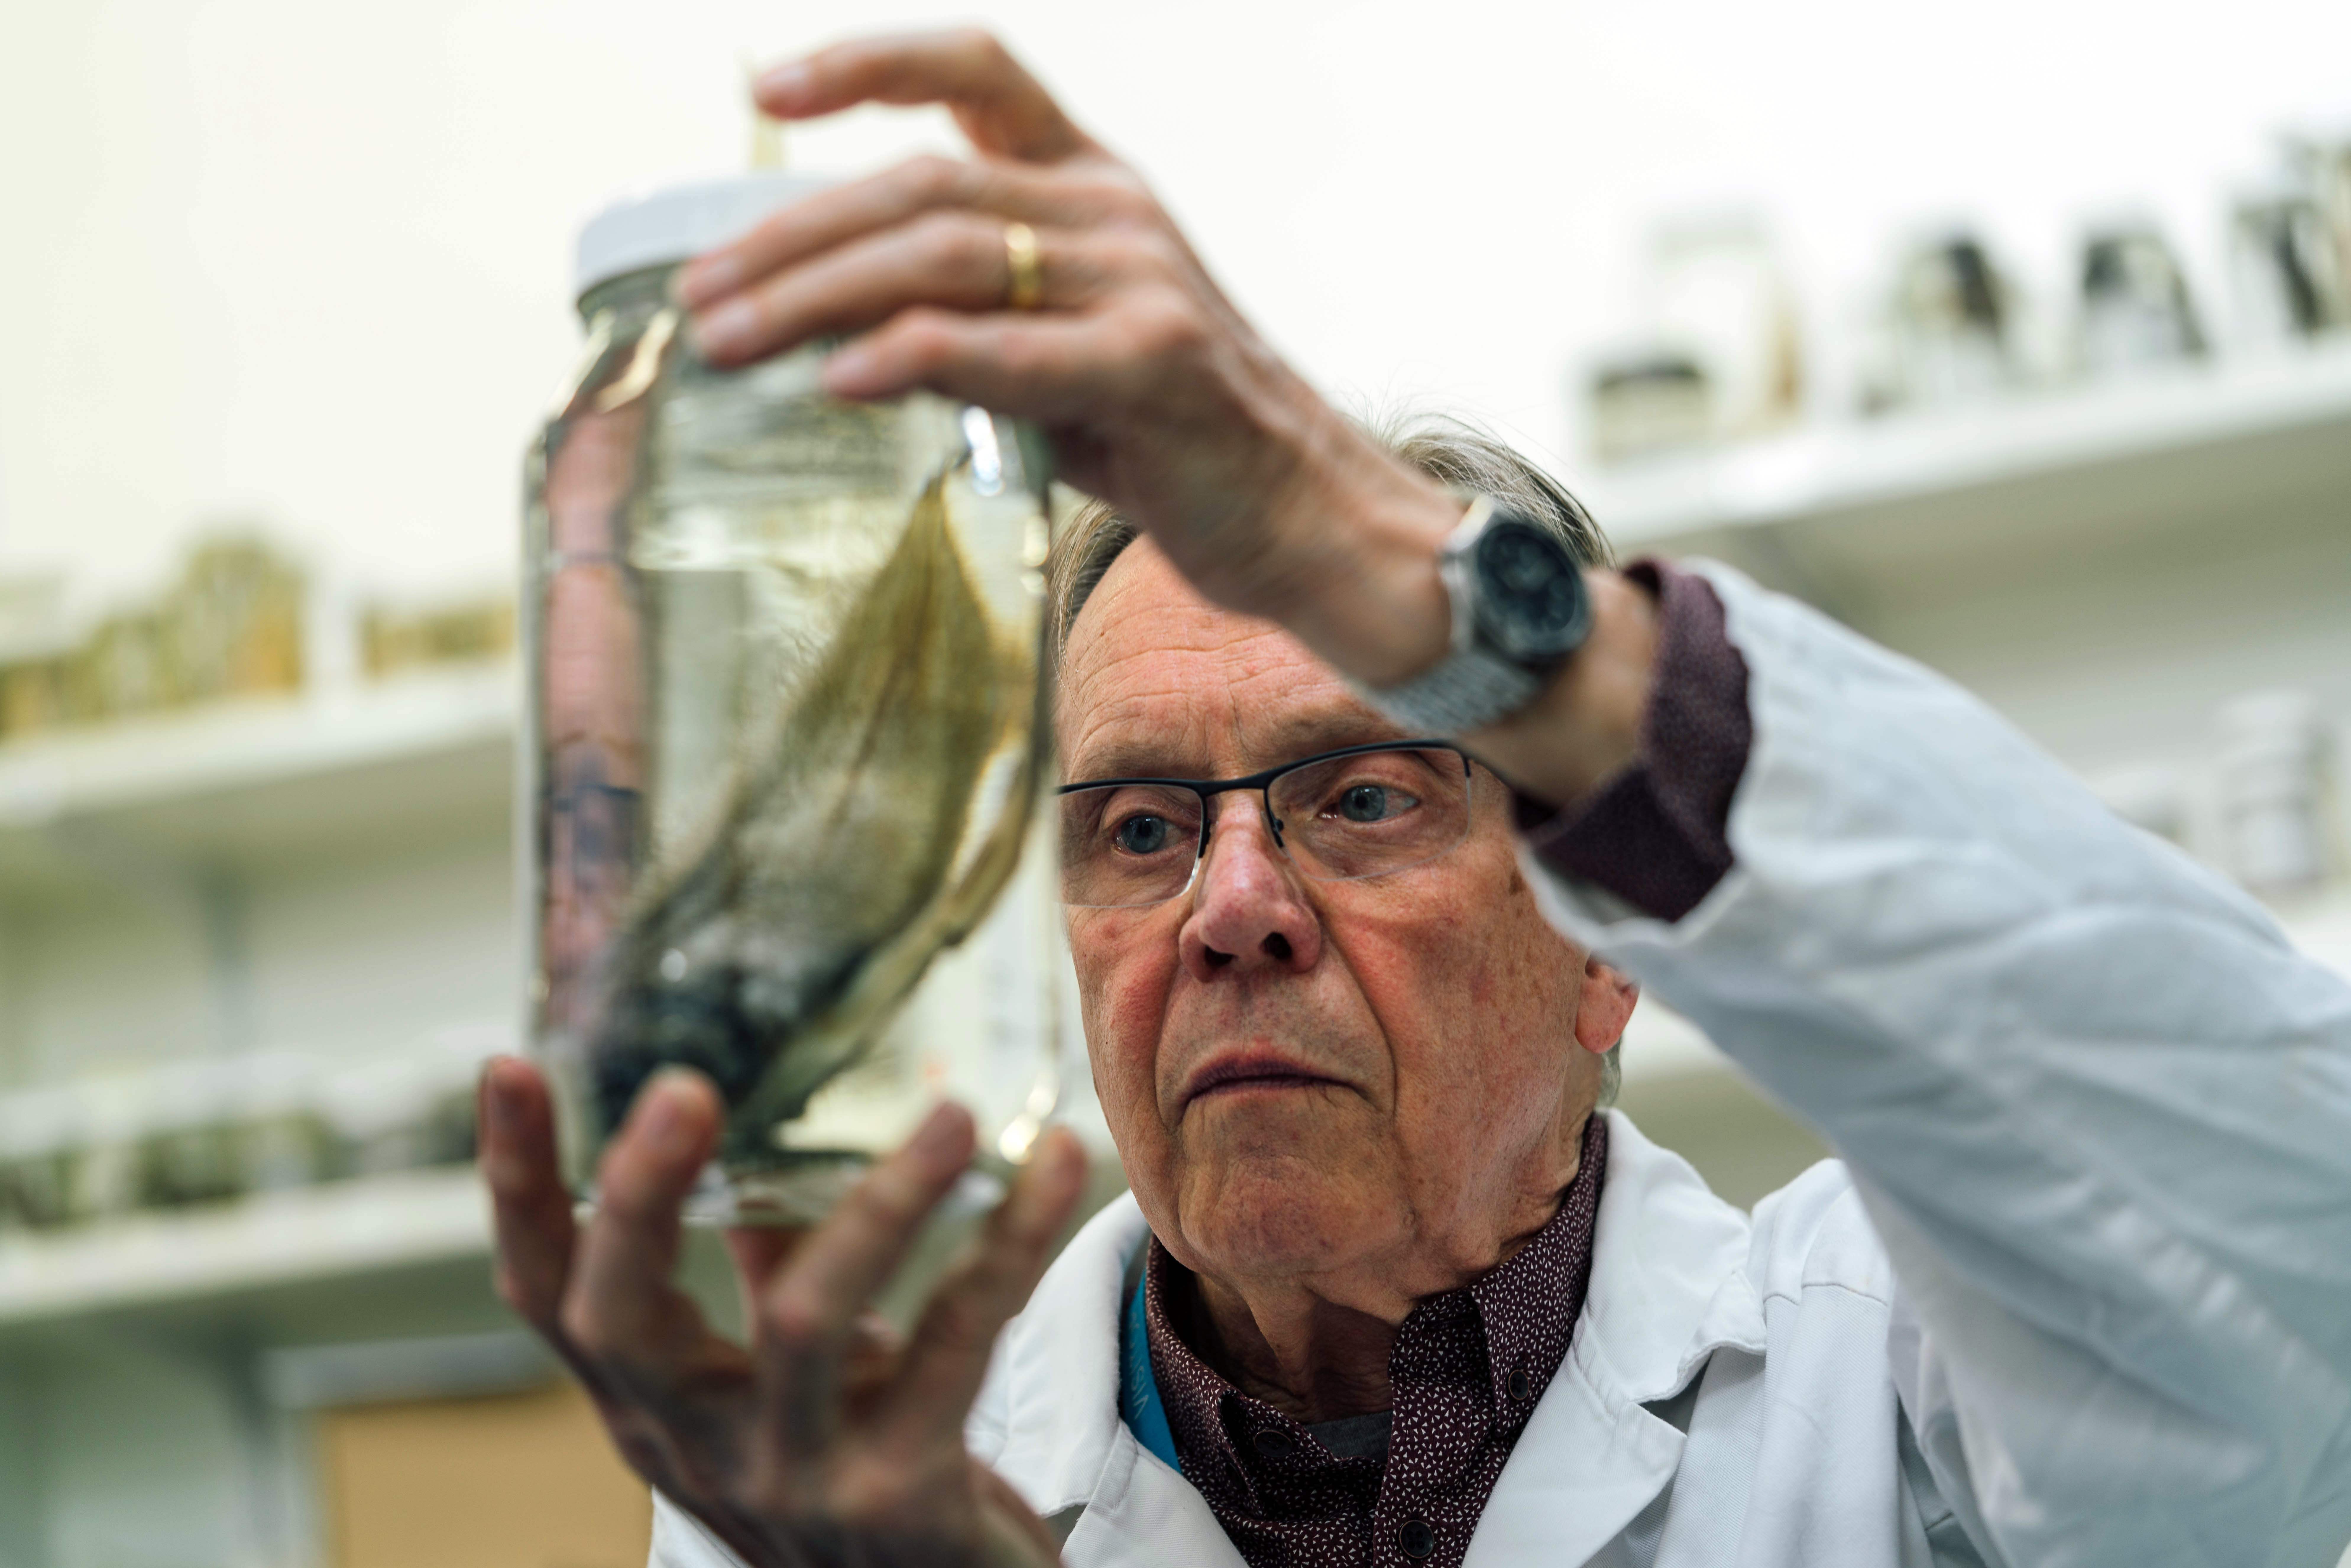 This undated handout picture released on February 21, 2018 by the Commonwealth Scientific and Industrial Research Organisation (CSIRO) shows Martin Gomon from Museums Victoria as he studies an abyss fish at the workshop in Hobart. More than 100 rarely seen fish species were hauled up from a deep and cold abyss off Australia during a scientific voyage, researchers said on February 21, including a cousin of the "world's ugliest animal" Mr Blobby. / AFP PHOTO / CSIRO / - / -----EDITORS NOTE --- RESTRICTED TO EDITORIAL USE - MANDATORY CREDIT "AFP PHOTO / CSIRO" - NO MARKETING - NO ADVERTISING CAMPAIGNS - DISTRIBUTED AS A SERVICE TO CLIENTS - NO ARCHIVES